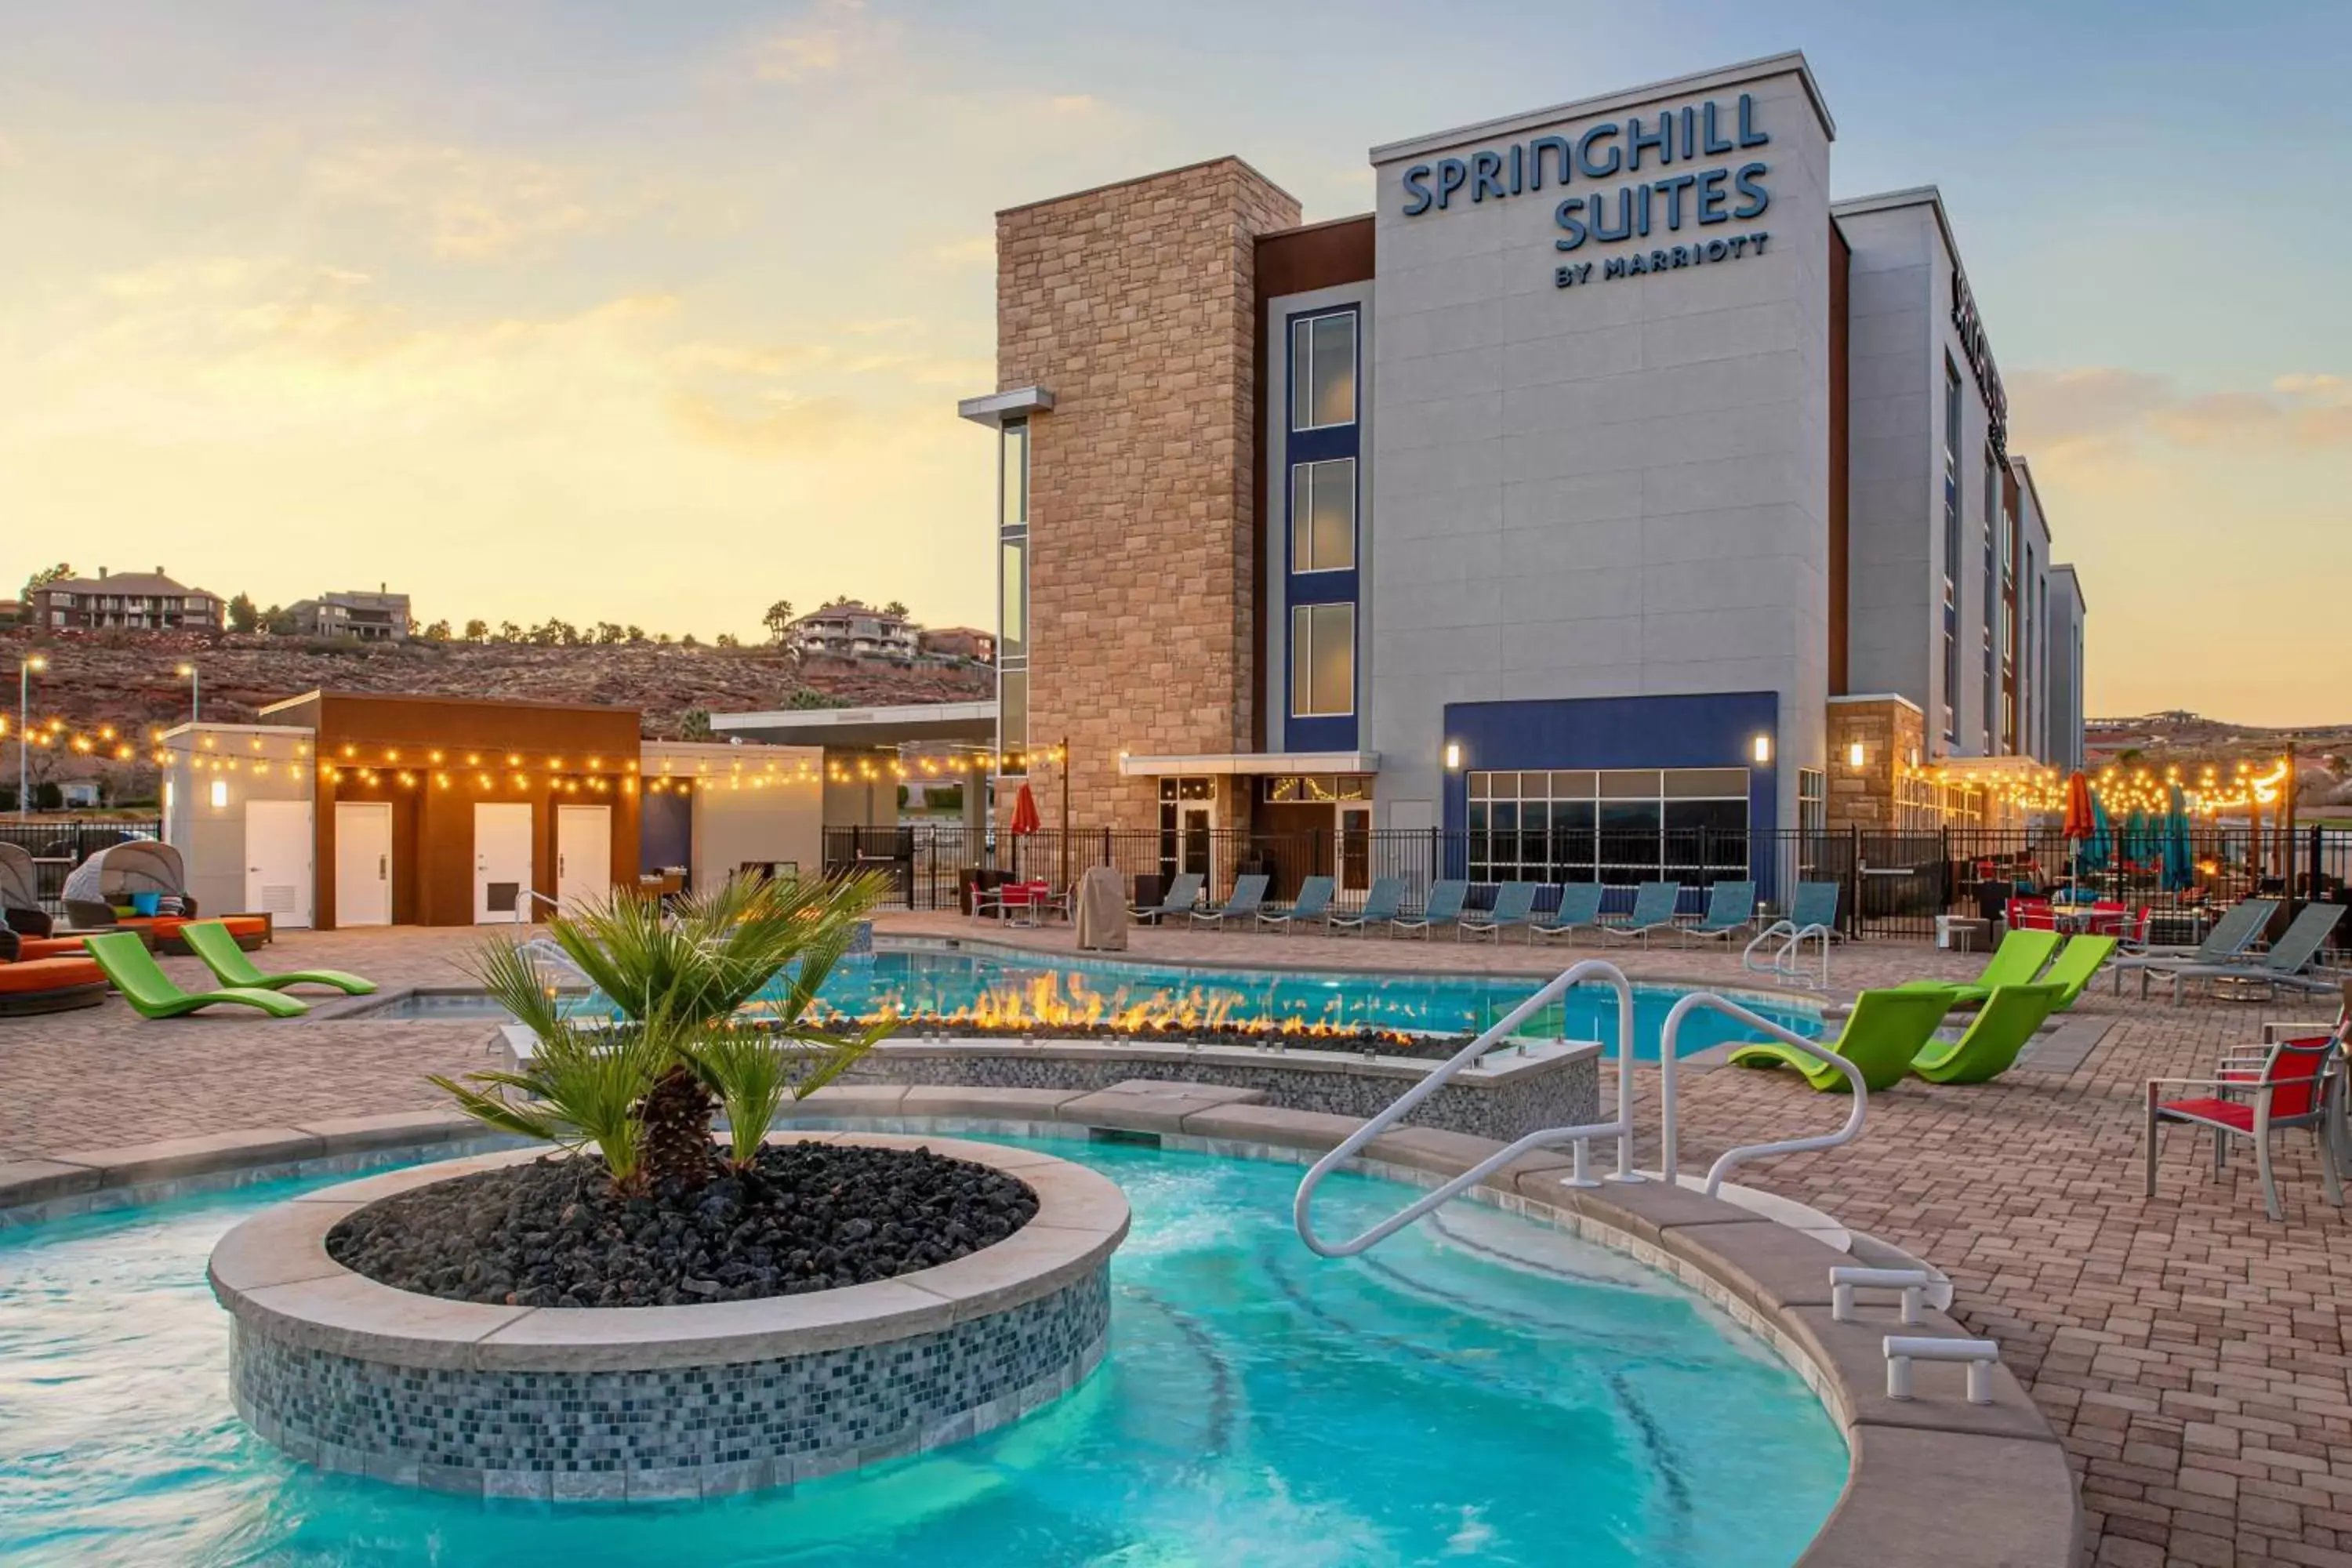 Area and facilities, Property Building in SpringHill Suites by Marriott St. George Washington